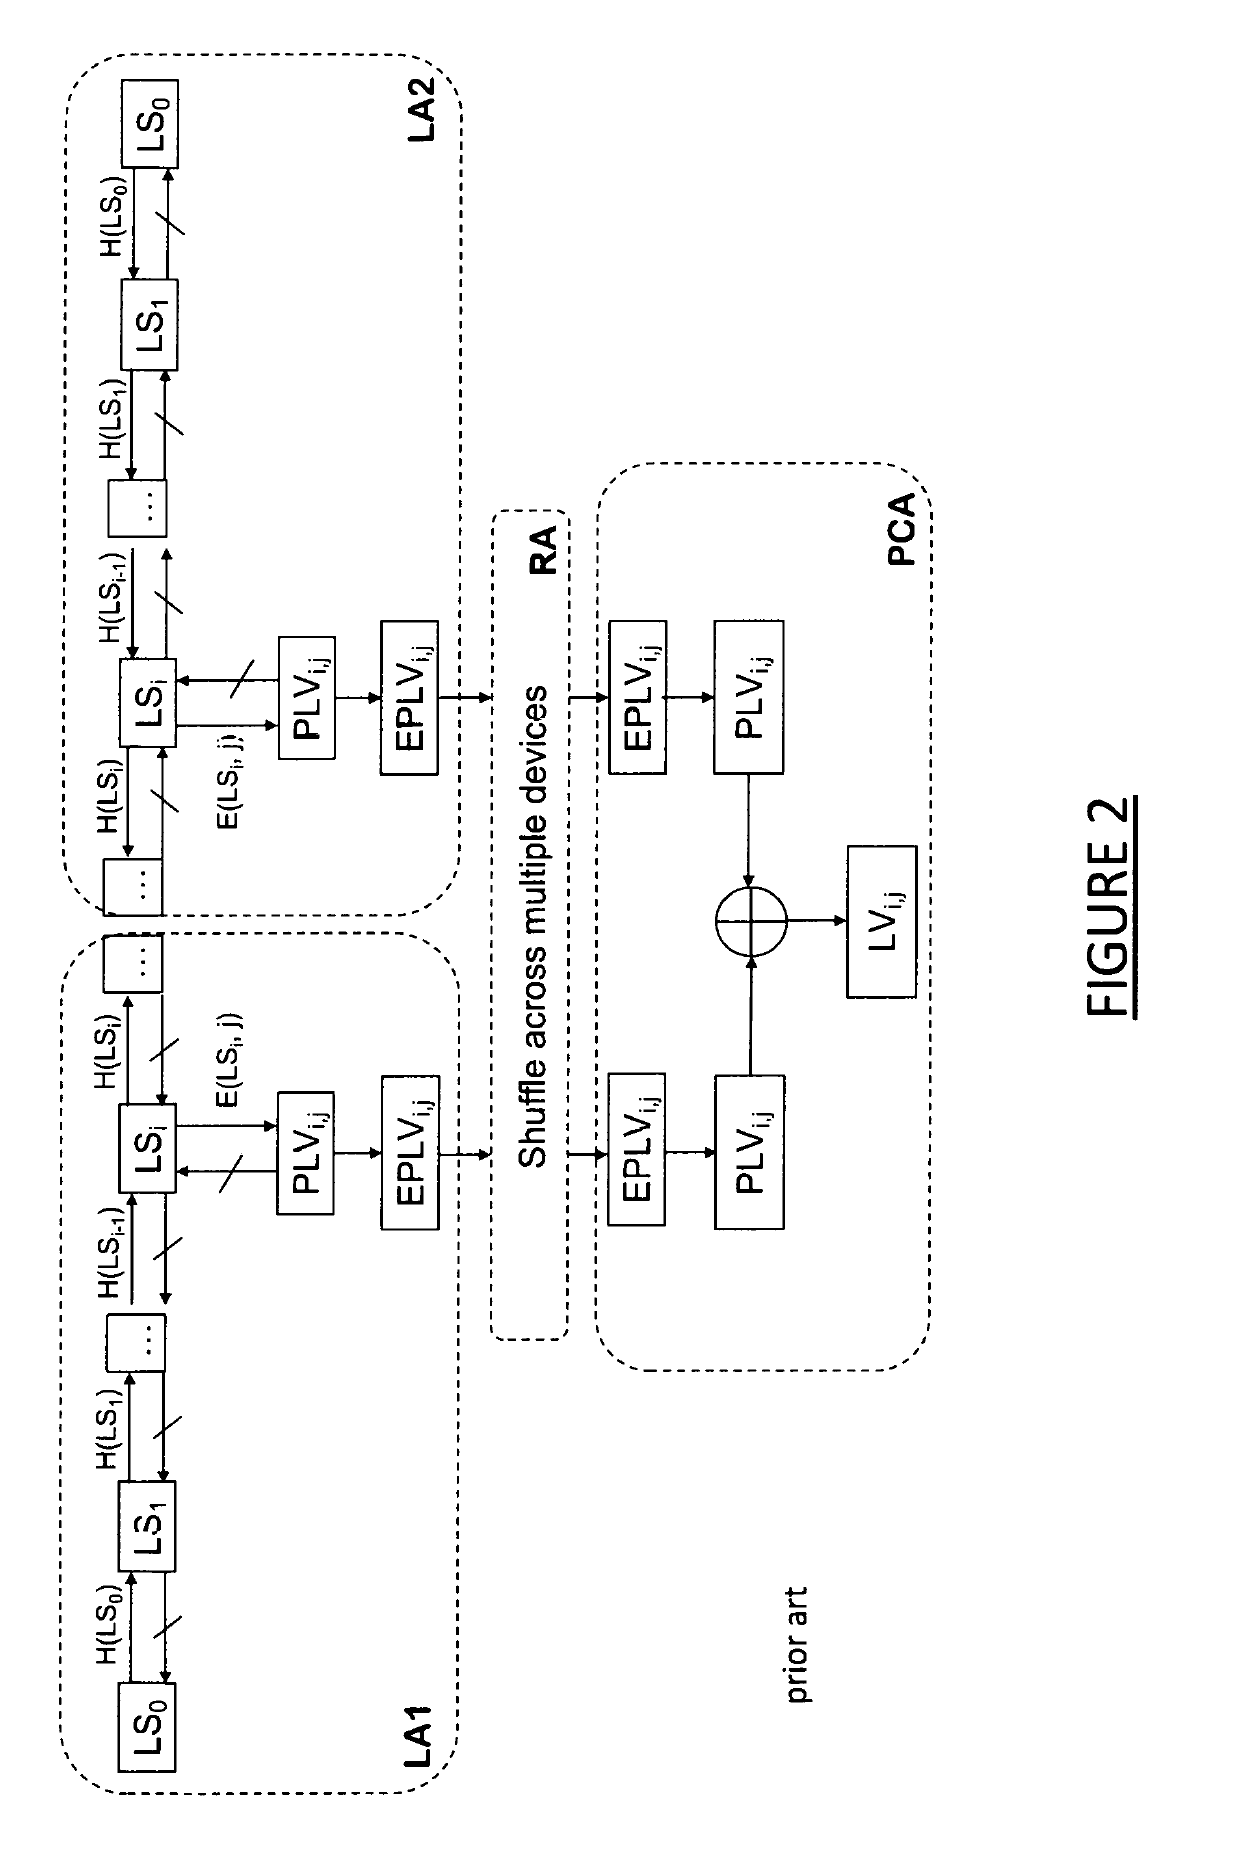 Method and system for secure connected vehicle communication